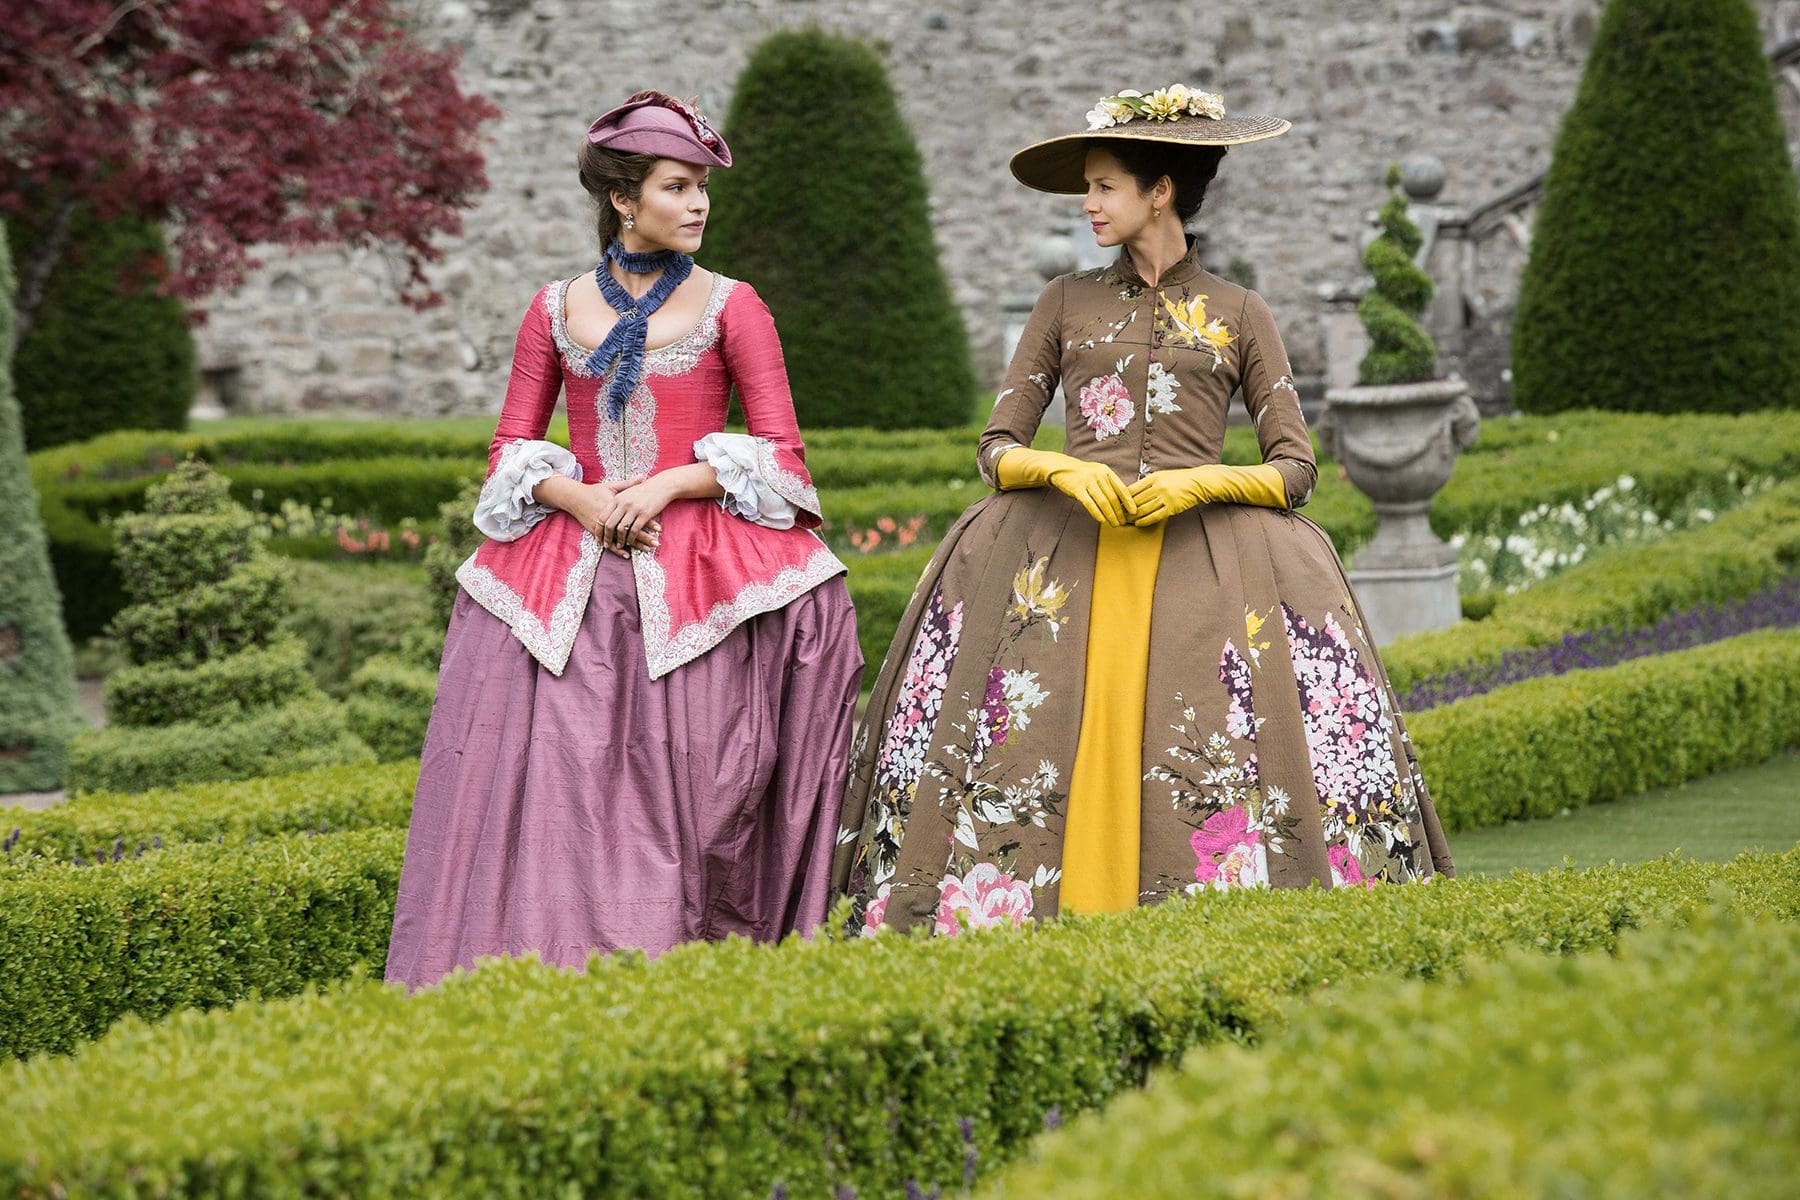 Annalise de Marillac from Outlander Season 2 in a pink and purple gown with blue collar detailing; walking with Claire Fraser in a brown and yellow floral gown in the gardens of Versailles